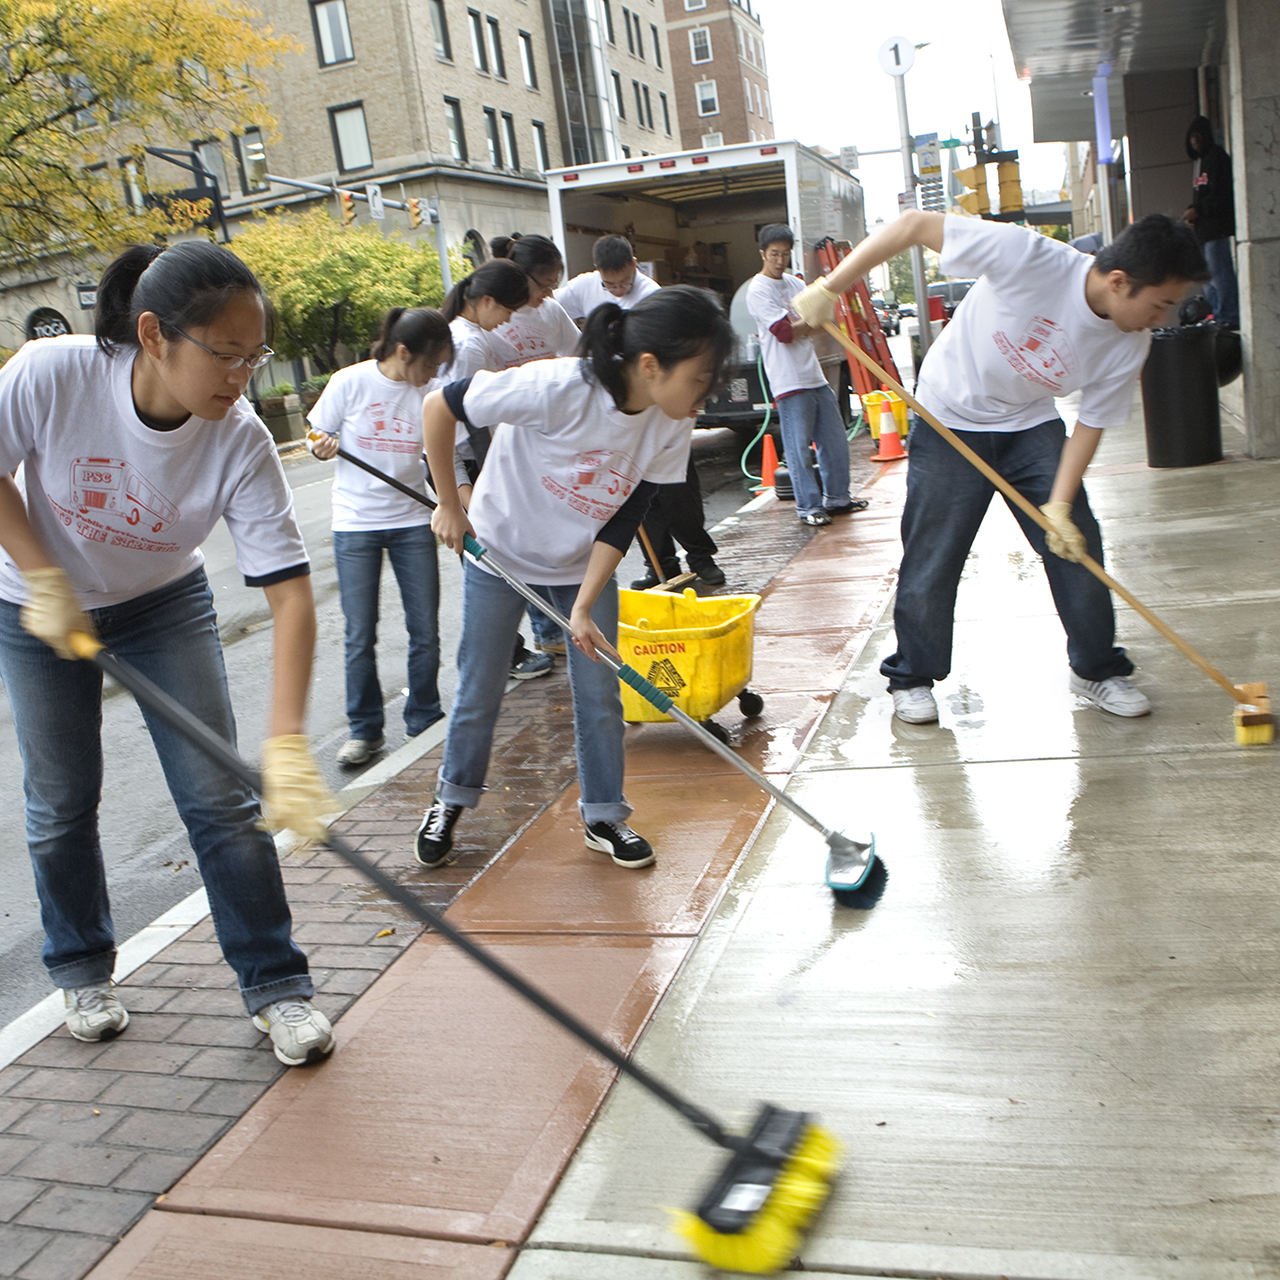 Several young adults use brooms to scrub a city sidewalk.